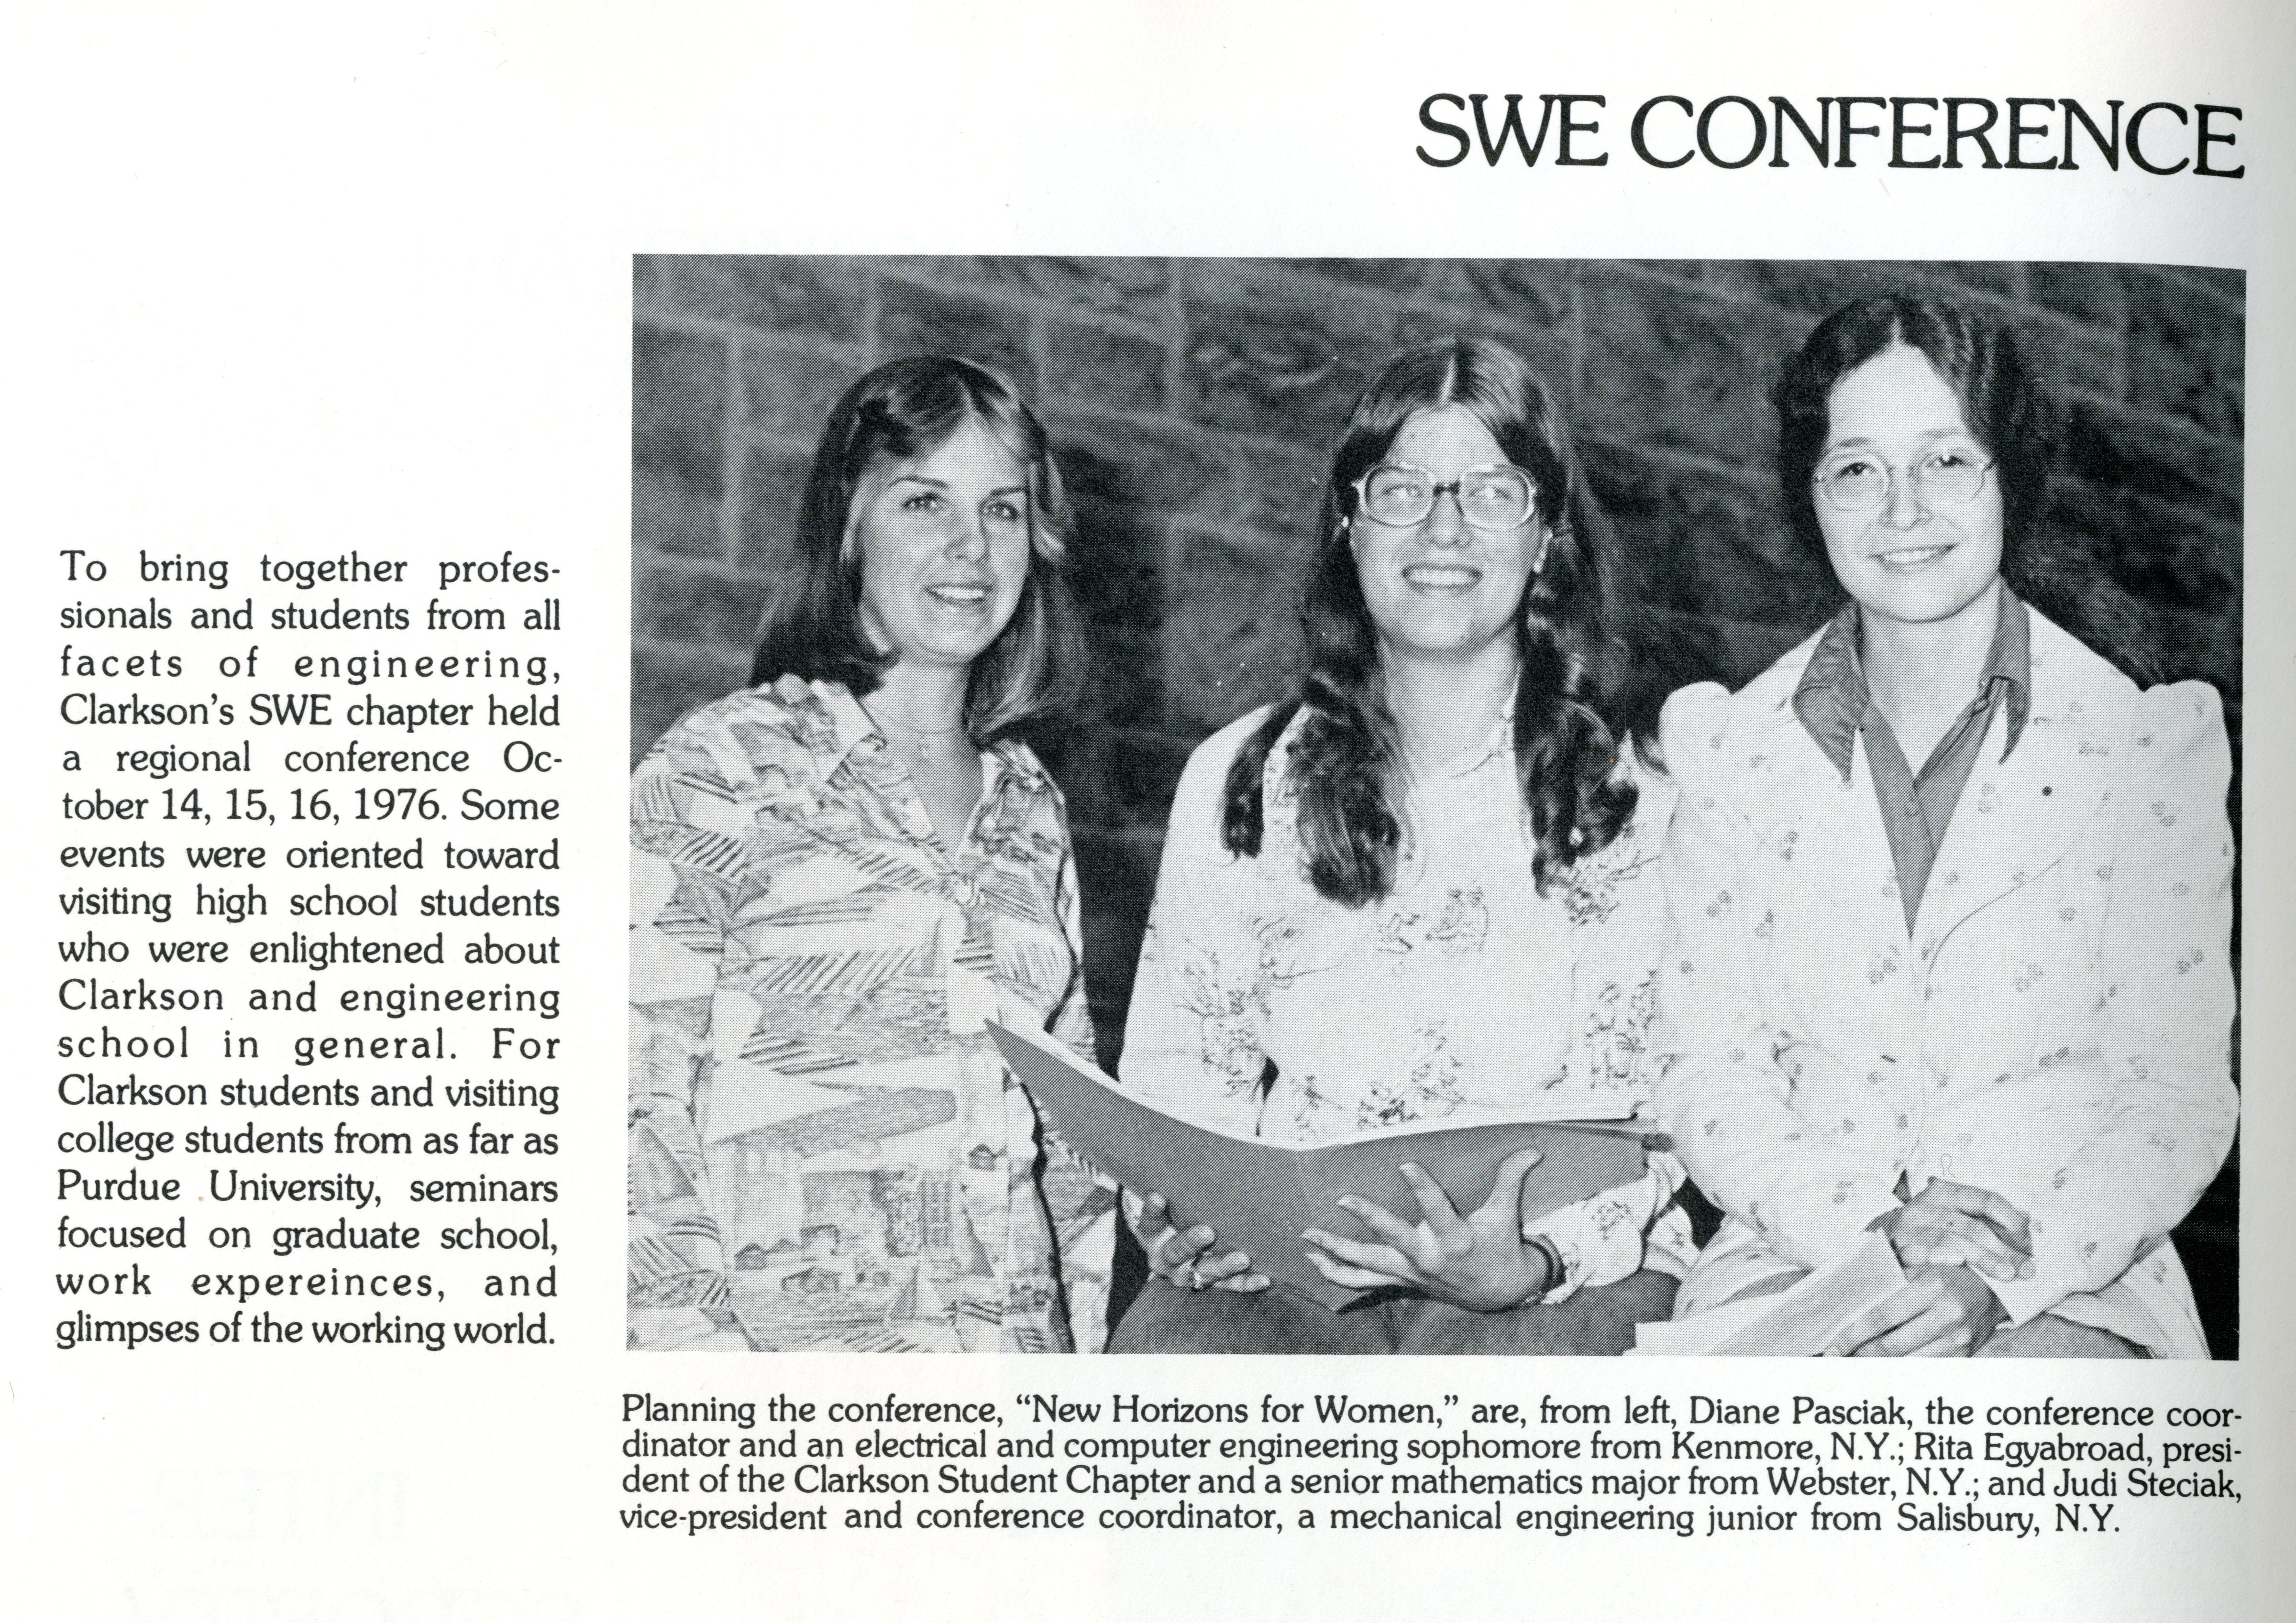 From Clarkson’s yearbook, 1977, when Clarkson hosted the SWE regional conference